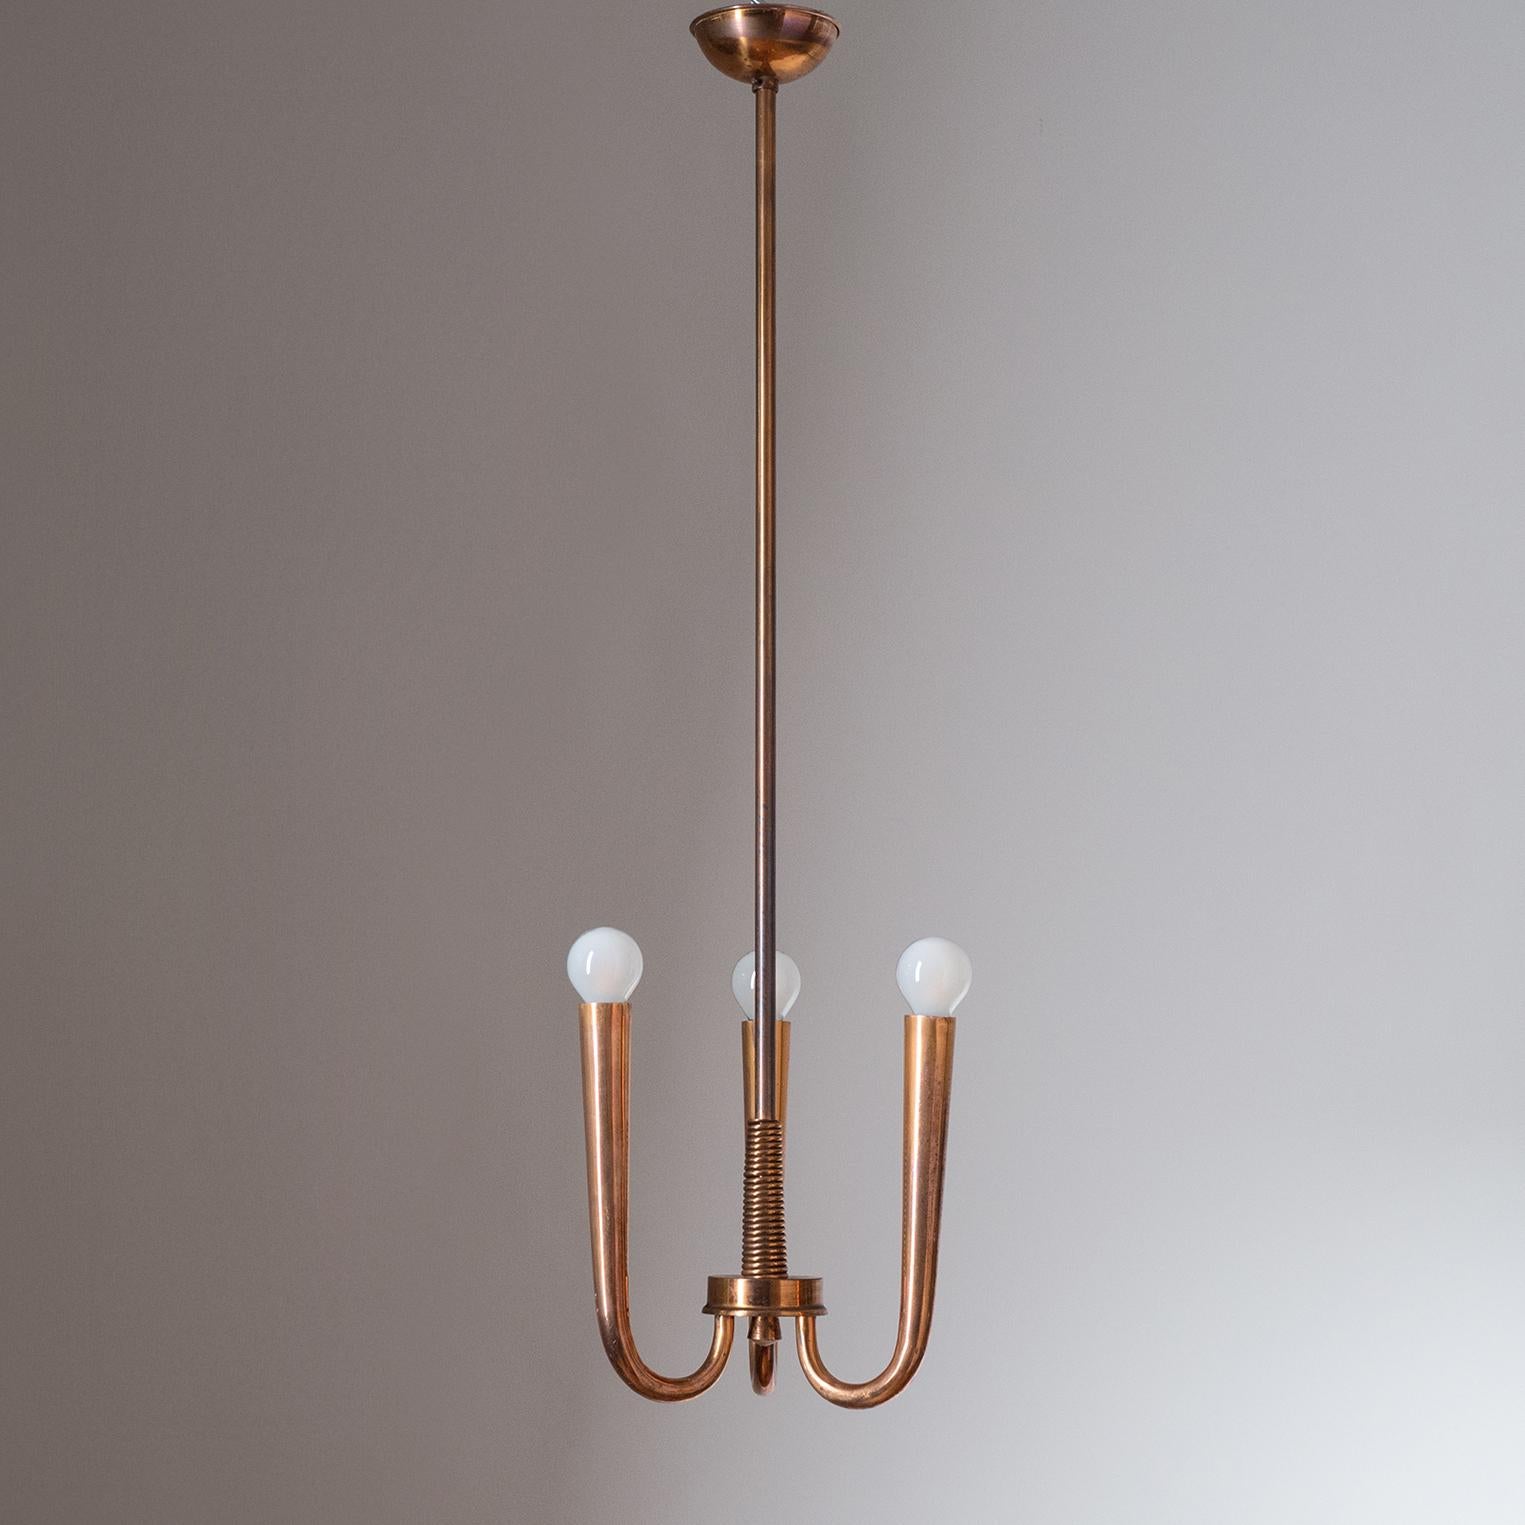 Rare Italian copper chandelier from the 1930s. Body height approximately 10inches/24cm. E14 sockets with new wiring.